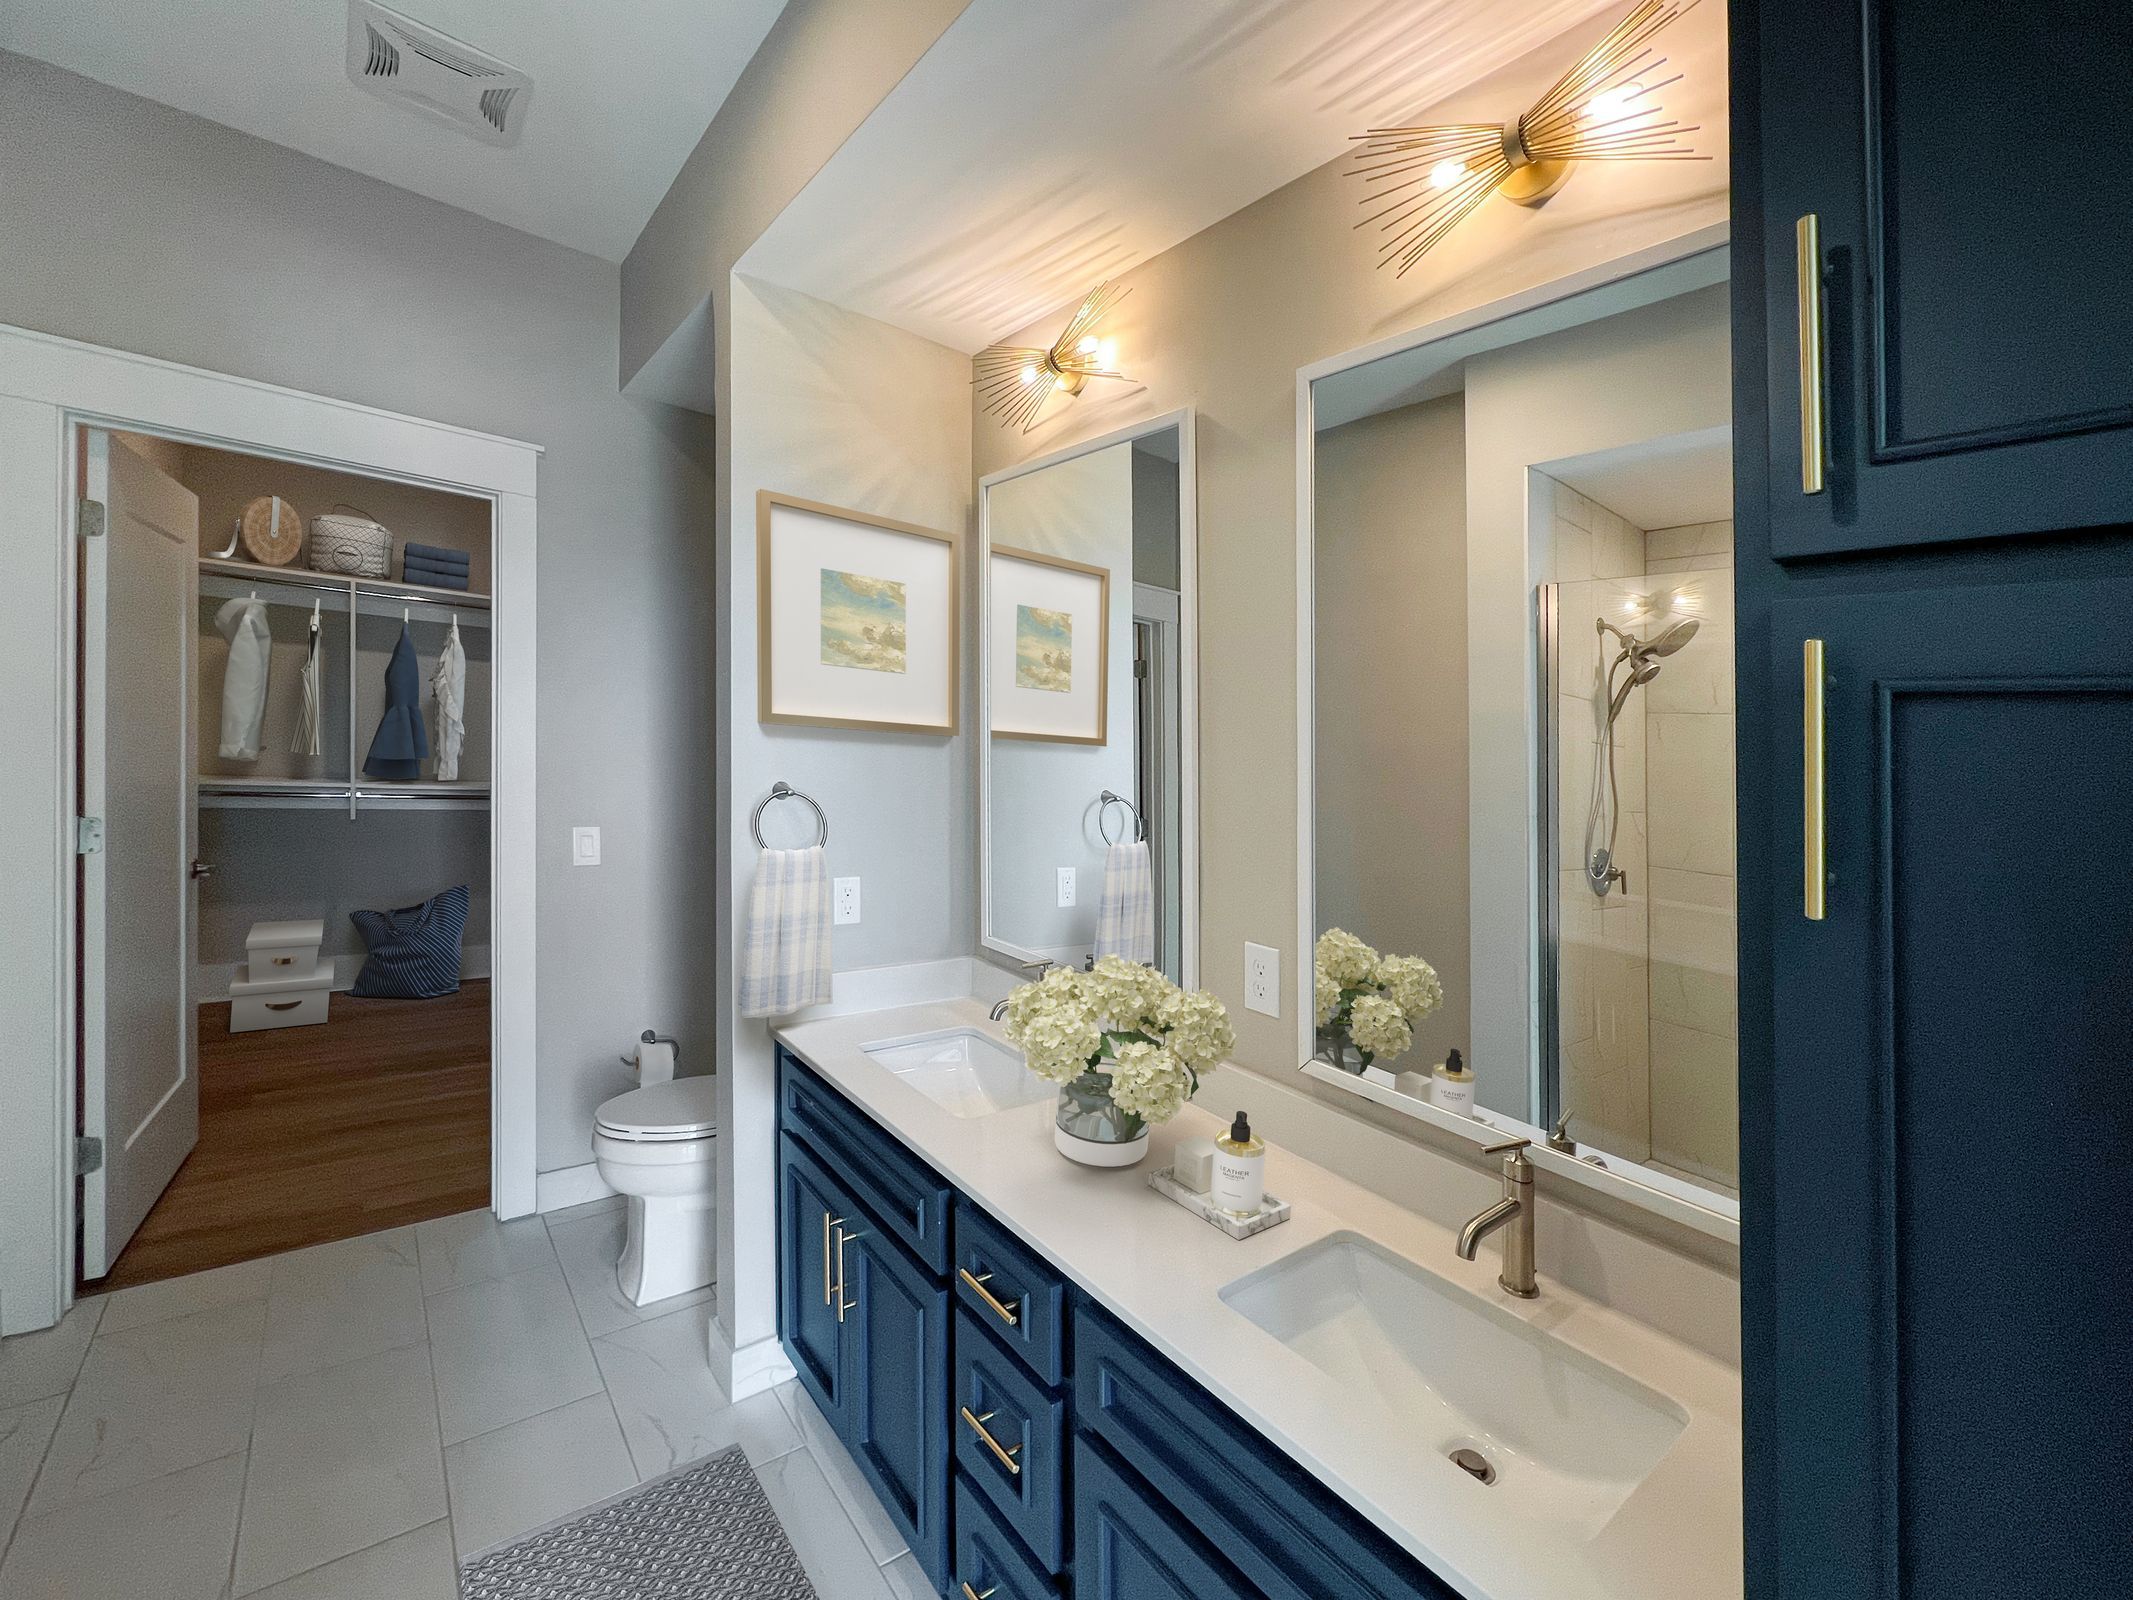 Spacious apartment bathroom with double vanities opening to a walk-in closet